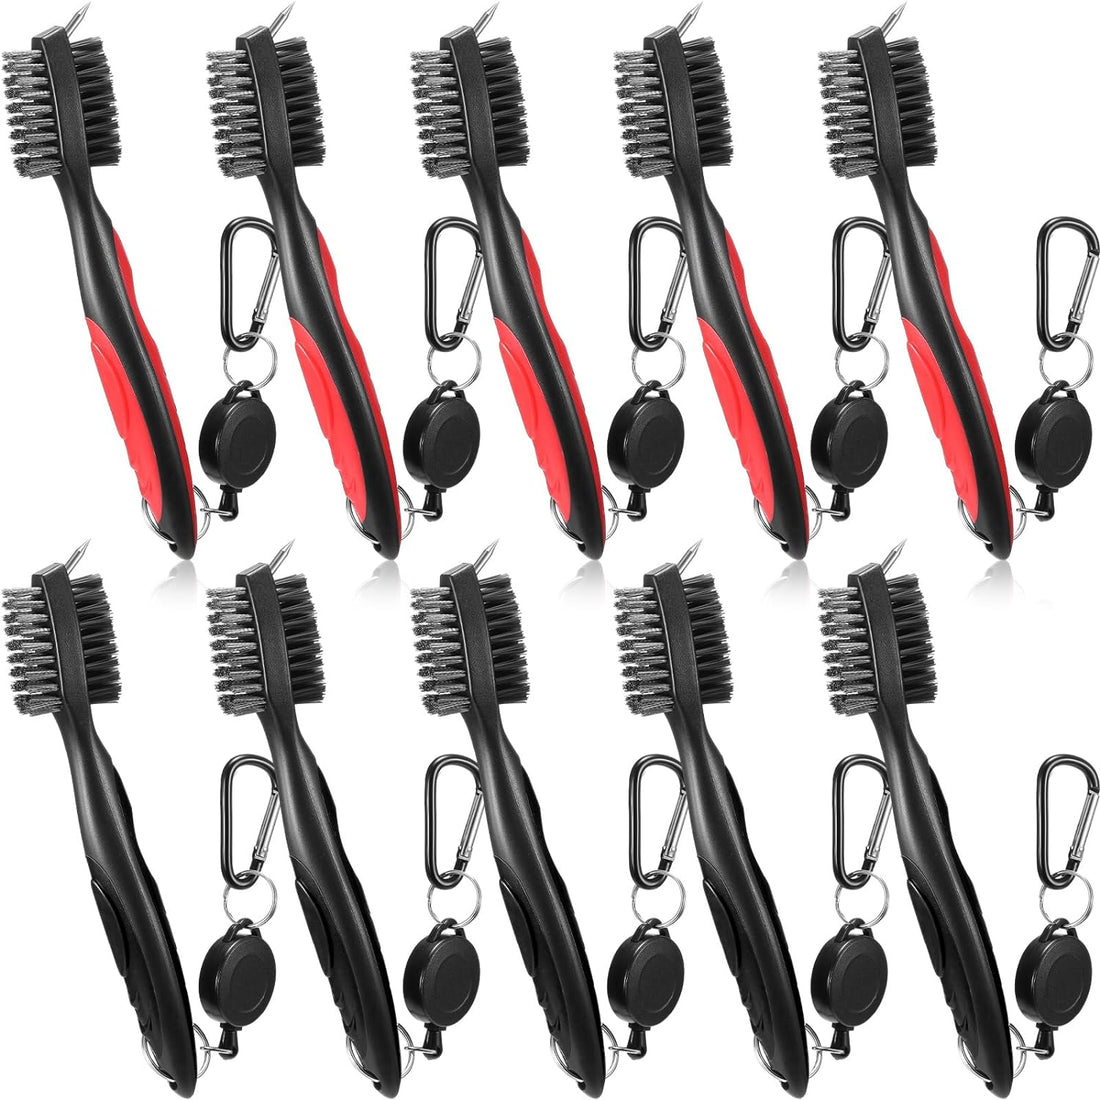 Mifoci 10 Pieces Golf Club Brush and Club Groove Cleaner with 2 ft Retractable Zip-line and Aluminum Hook Buckle Black Red Golf Scrub Brush Comfort Handle Cleaning Tools for Golf Club Bag